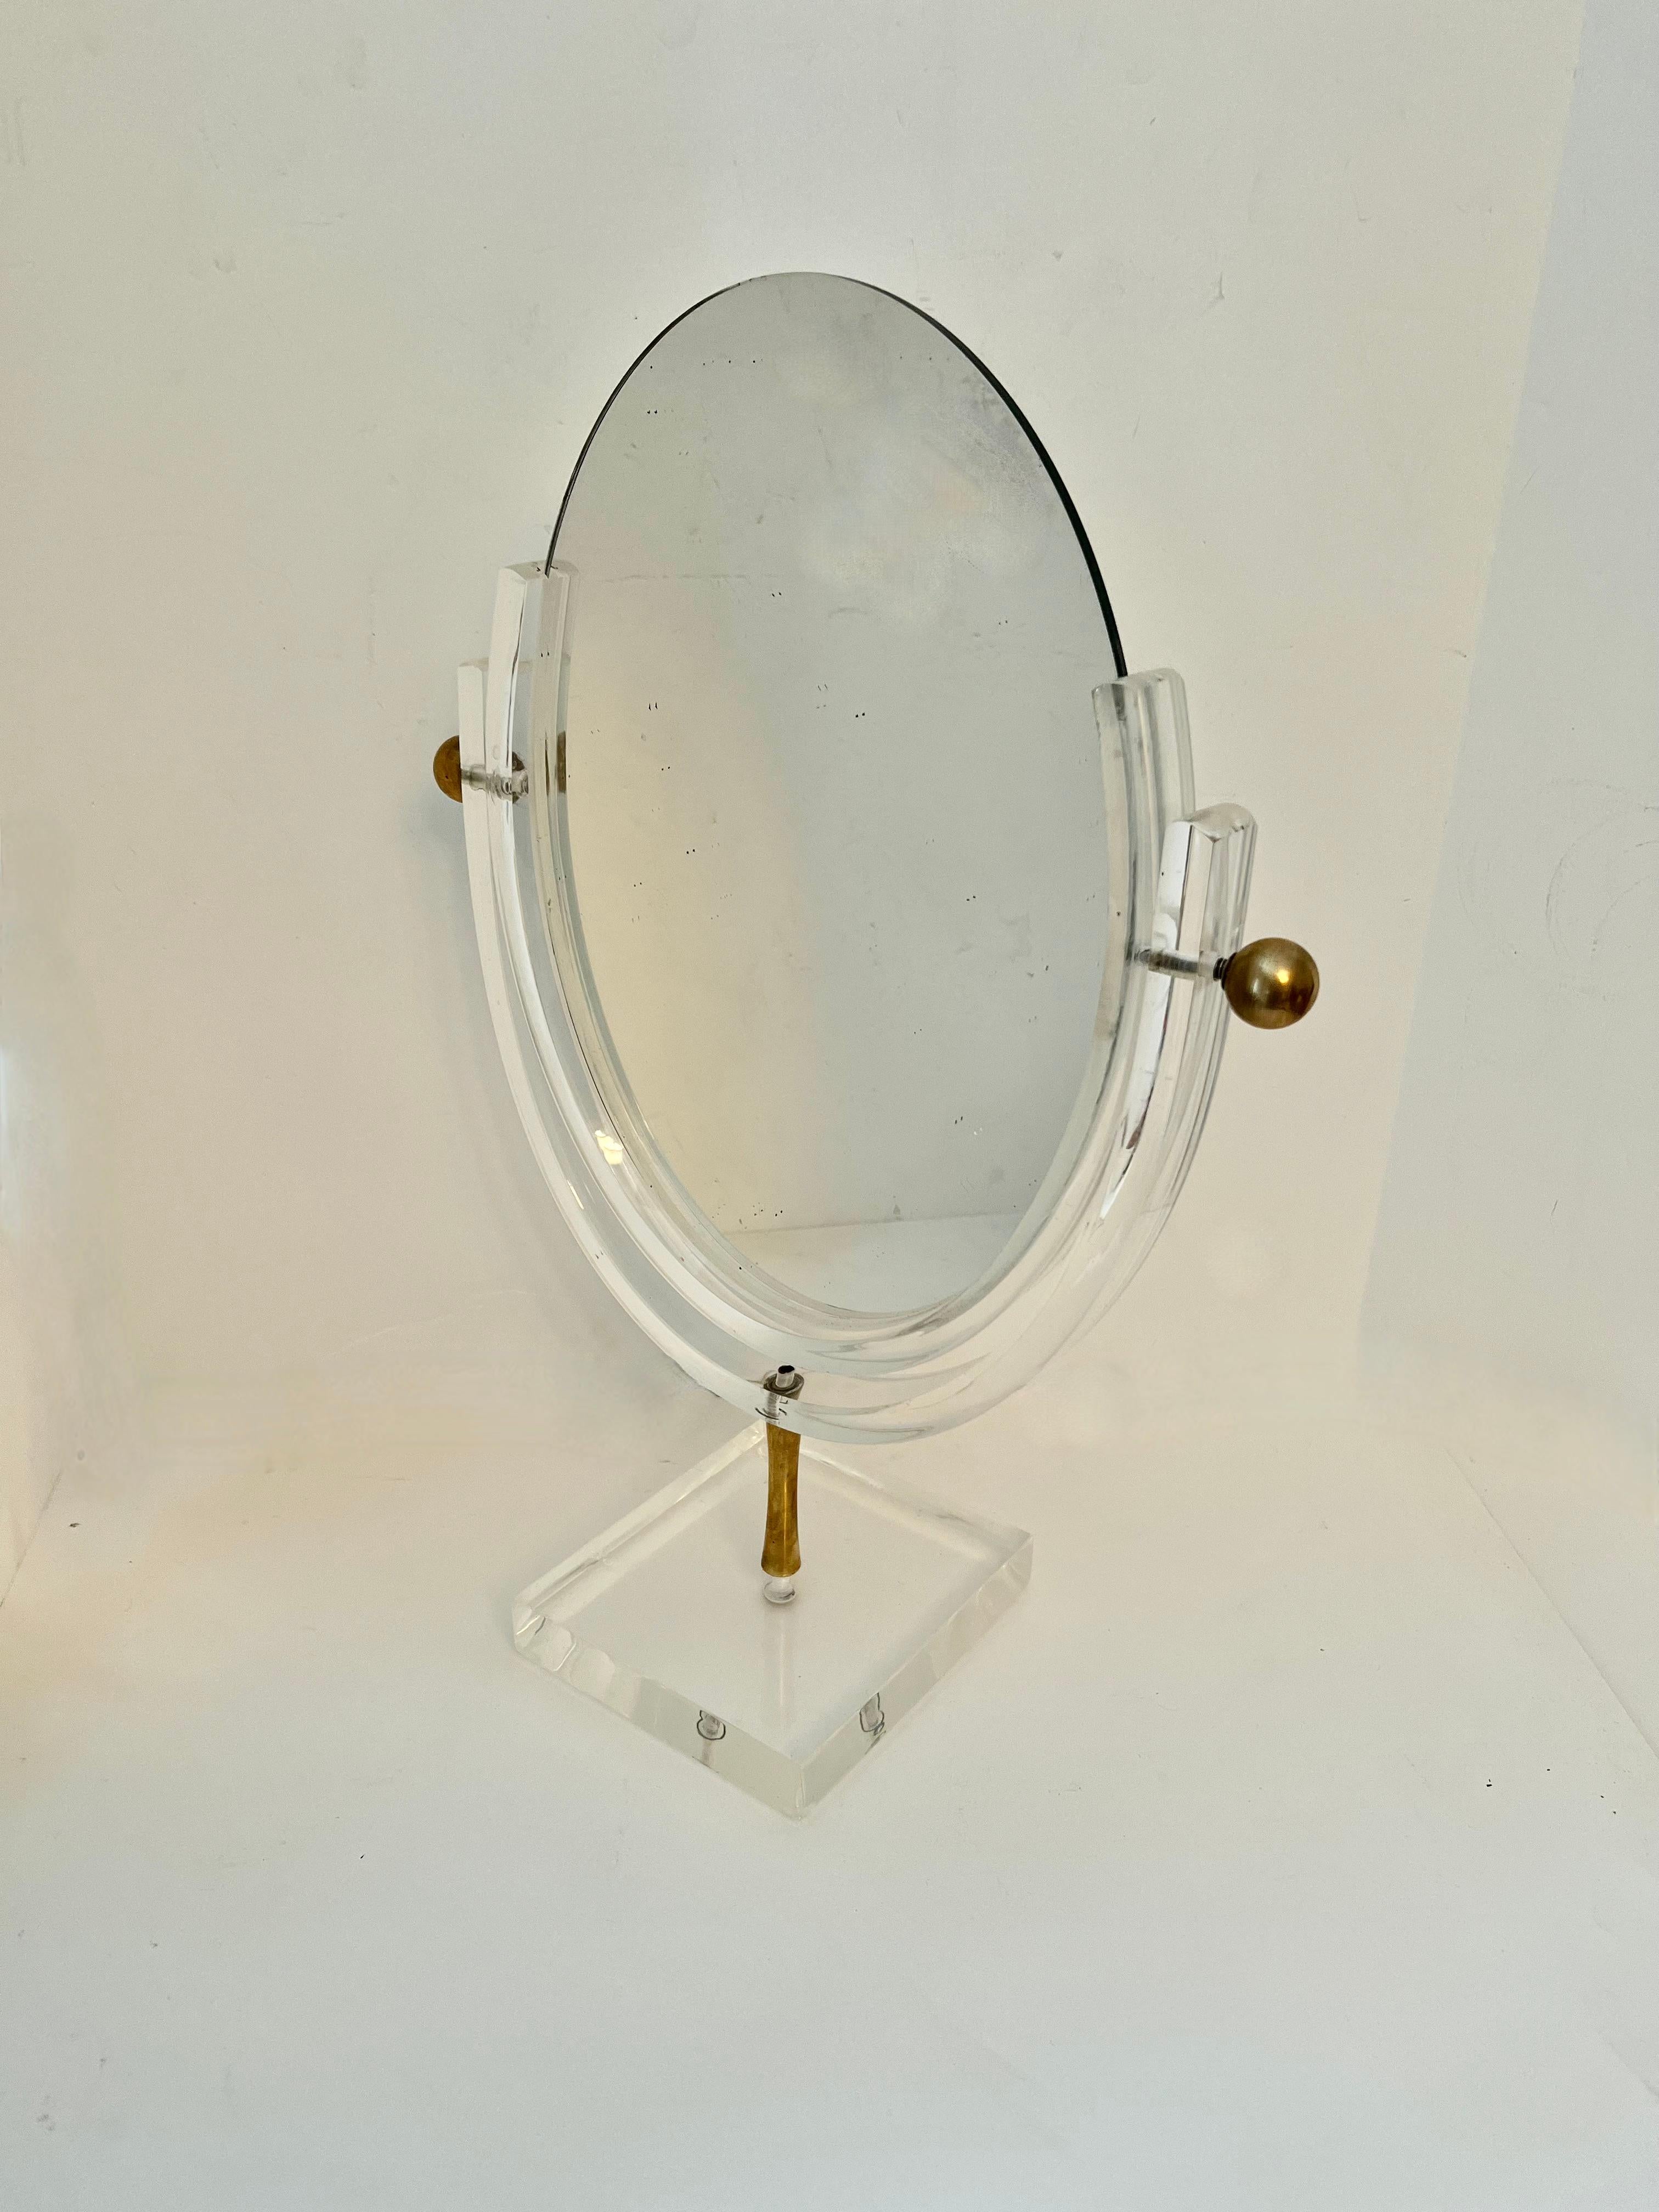 A wonderful acrylic frame mirror with brass finials.  The mirror is double sided so can 'float' in the middle of a room.  A lovely piece with some patina, but we have polished out most of the imperfections.  

A great mid century piece by the man